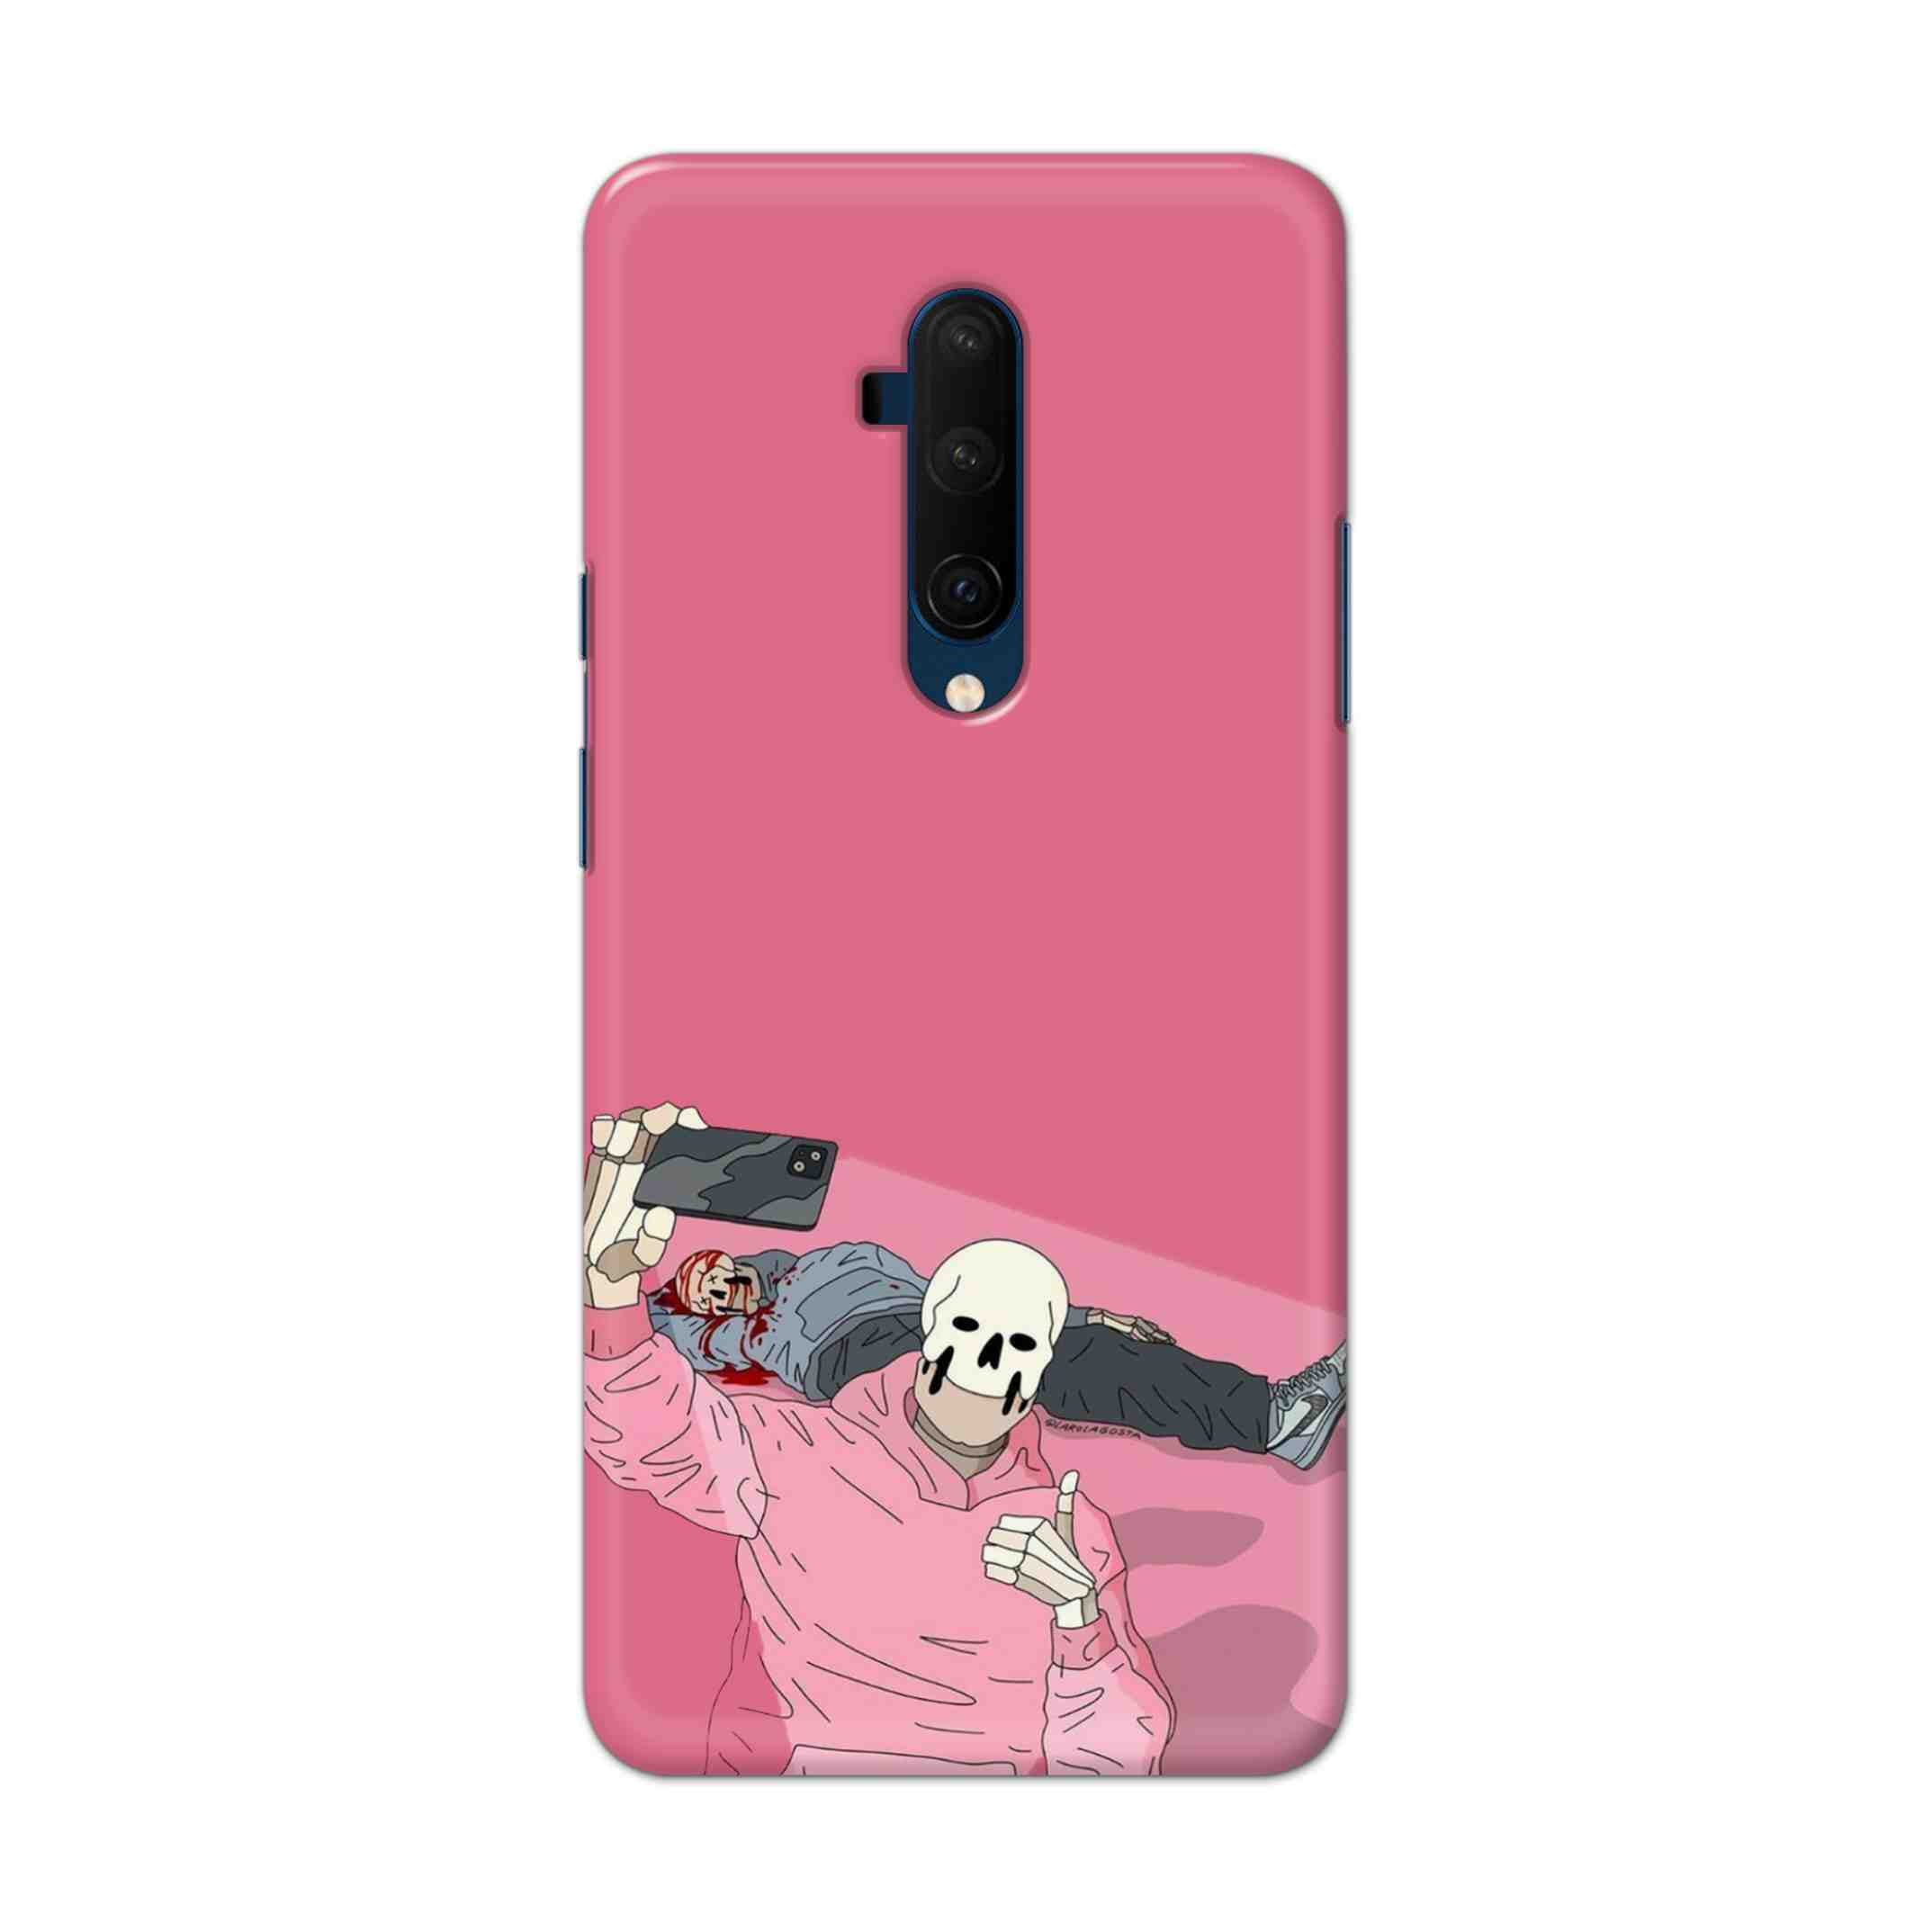 Buy Selfie Hard Back Mobile Phone Case Cover For OnePlus 7T Pro Online